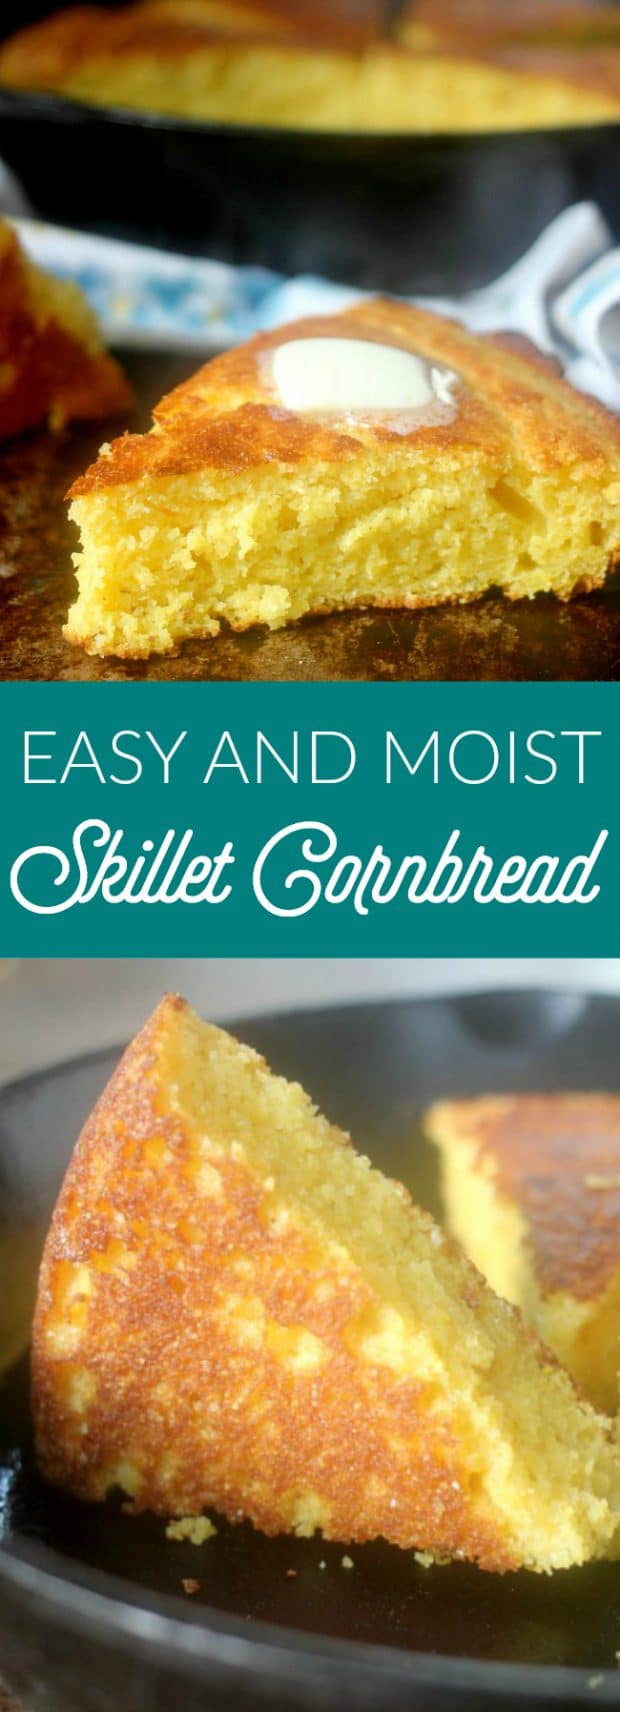 This easy and moist cornbread recipe is a true southern treat made with tangy buttermilk and cooked in a cast iron skillet to achieve that iconic crispy bottom. This one bowl recipe is incredibly versatile and is a great base recipe to create endless variations! 